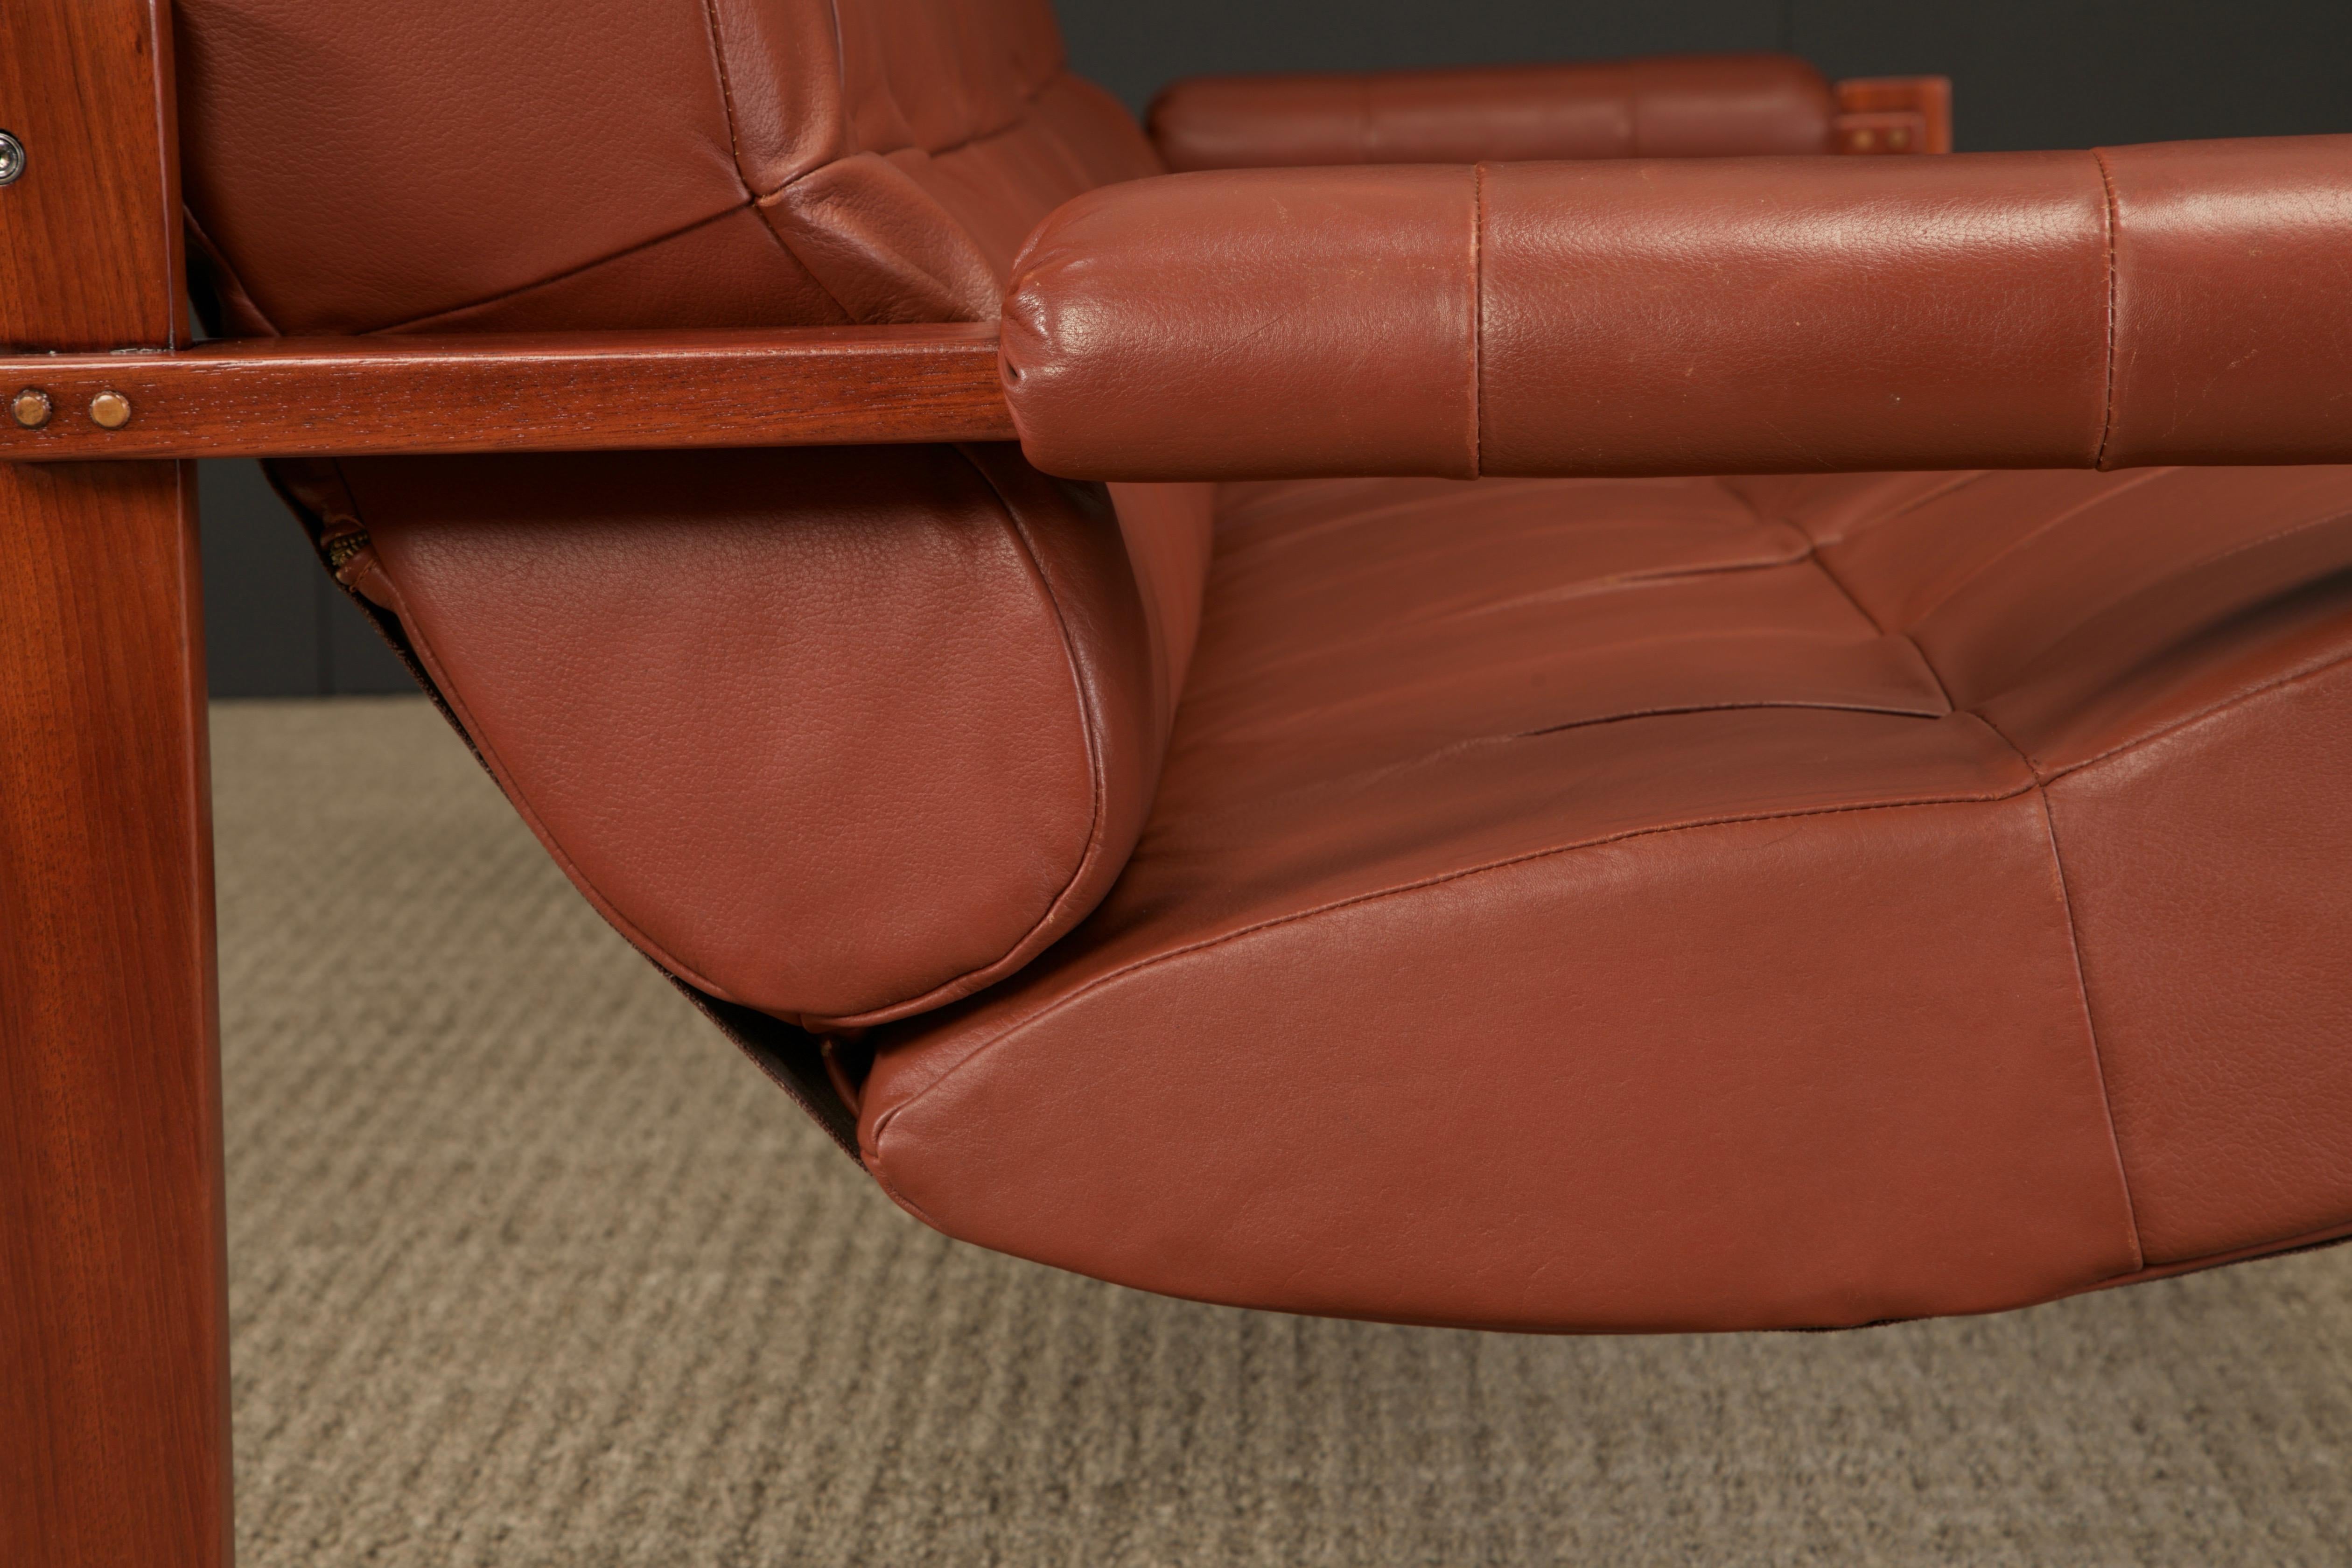 Percival Lafer 'S-1' Rosewood and Leather Three Seat Sofa, Brazil, 1976, Signed 9